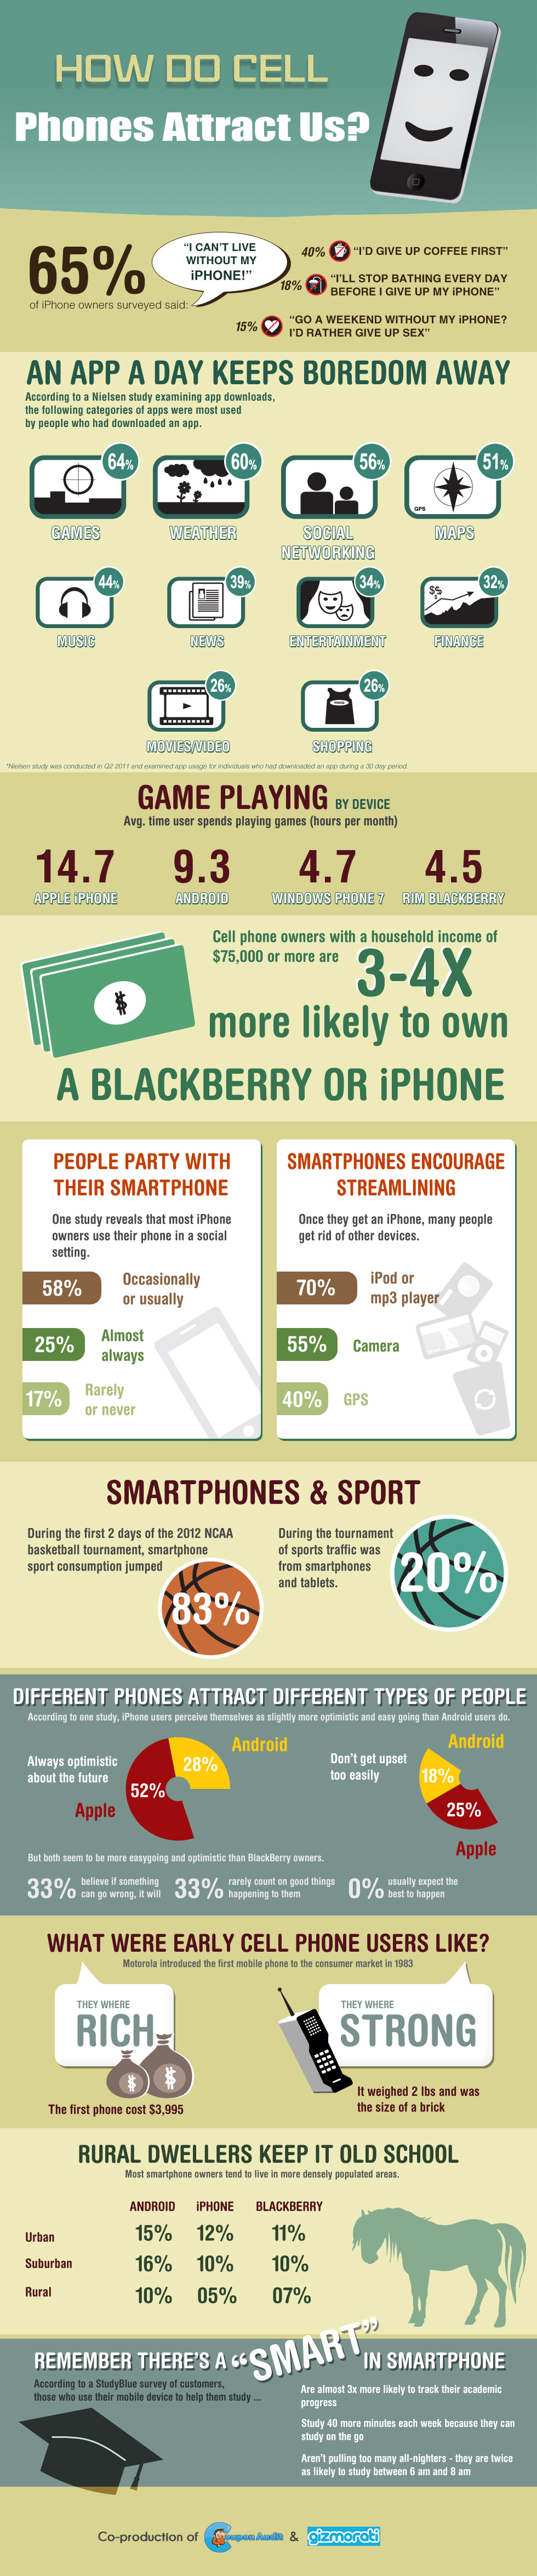 7. How-Do-Cell-Phones-Attract-Us